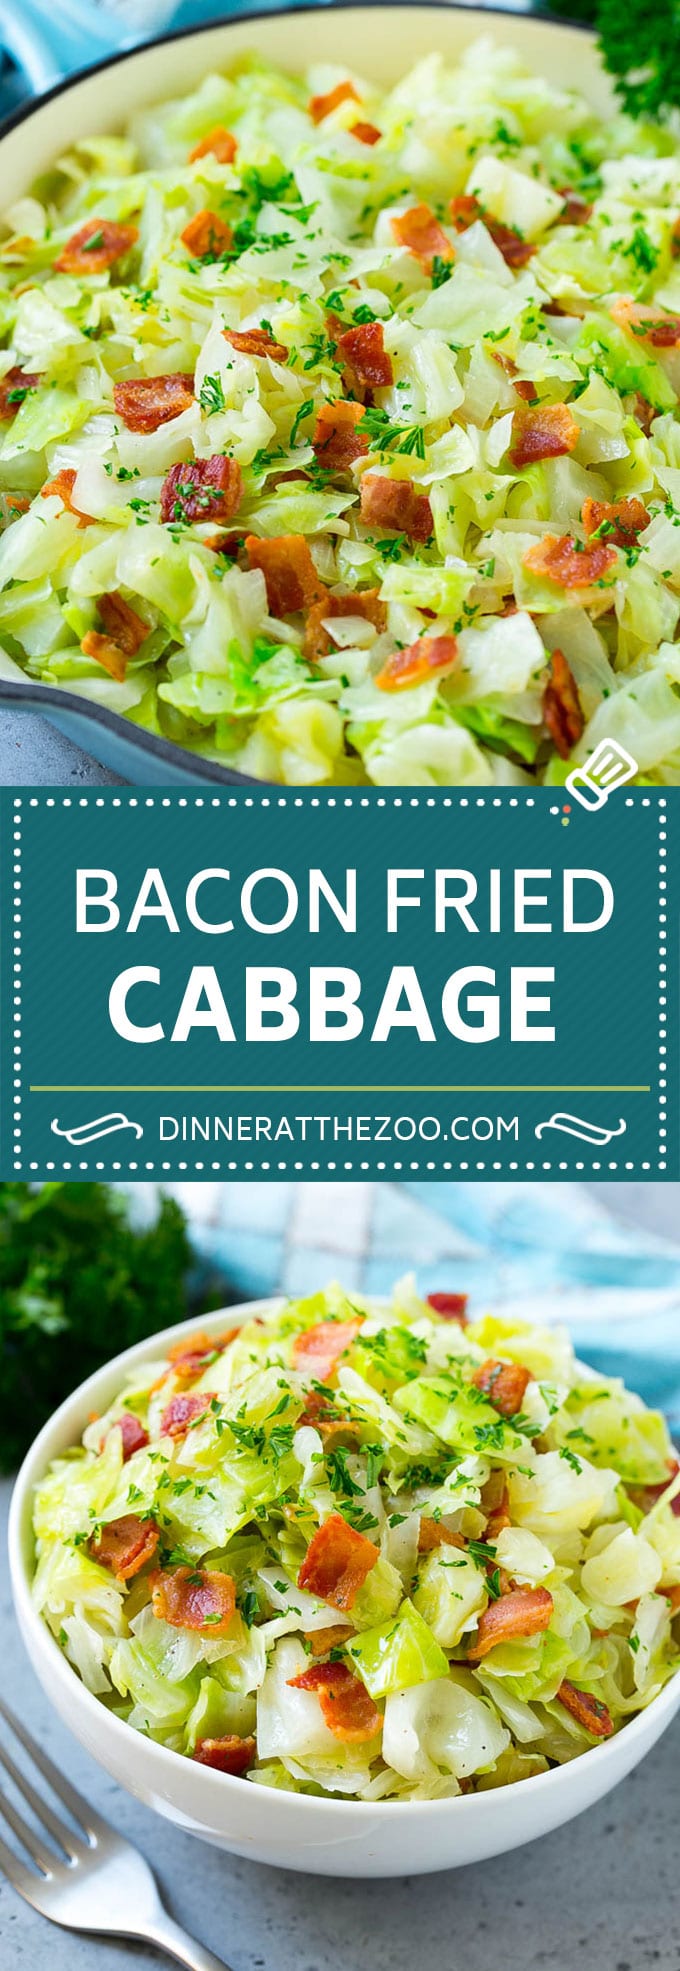 Fried Cabbage Recipe | Cabbage with Bacon | Cabbage Side Dish #cabbage #bacon #sidedish #lowcarb #keto #dinneratthezoo